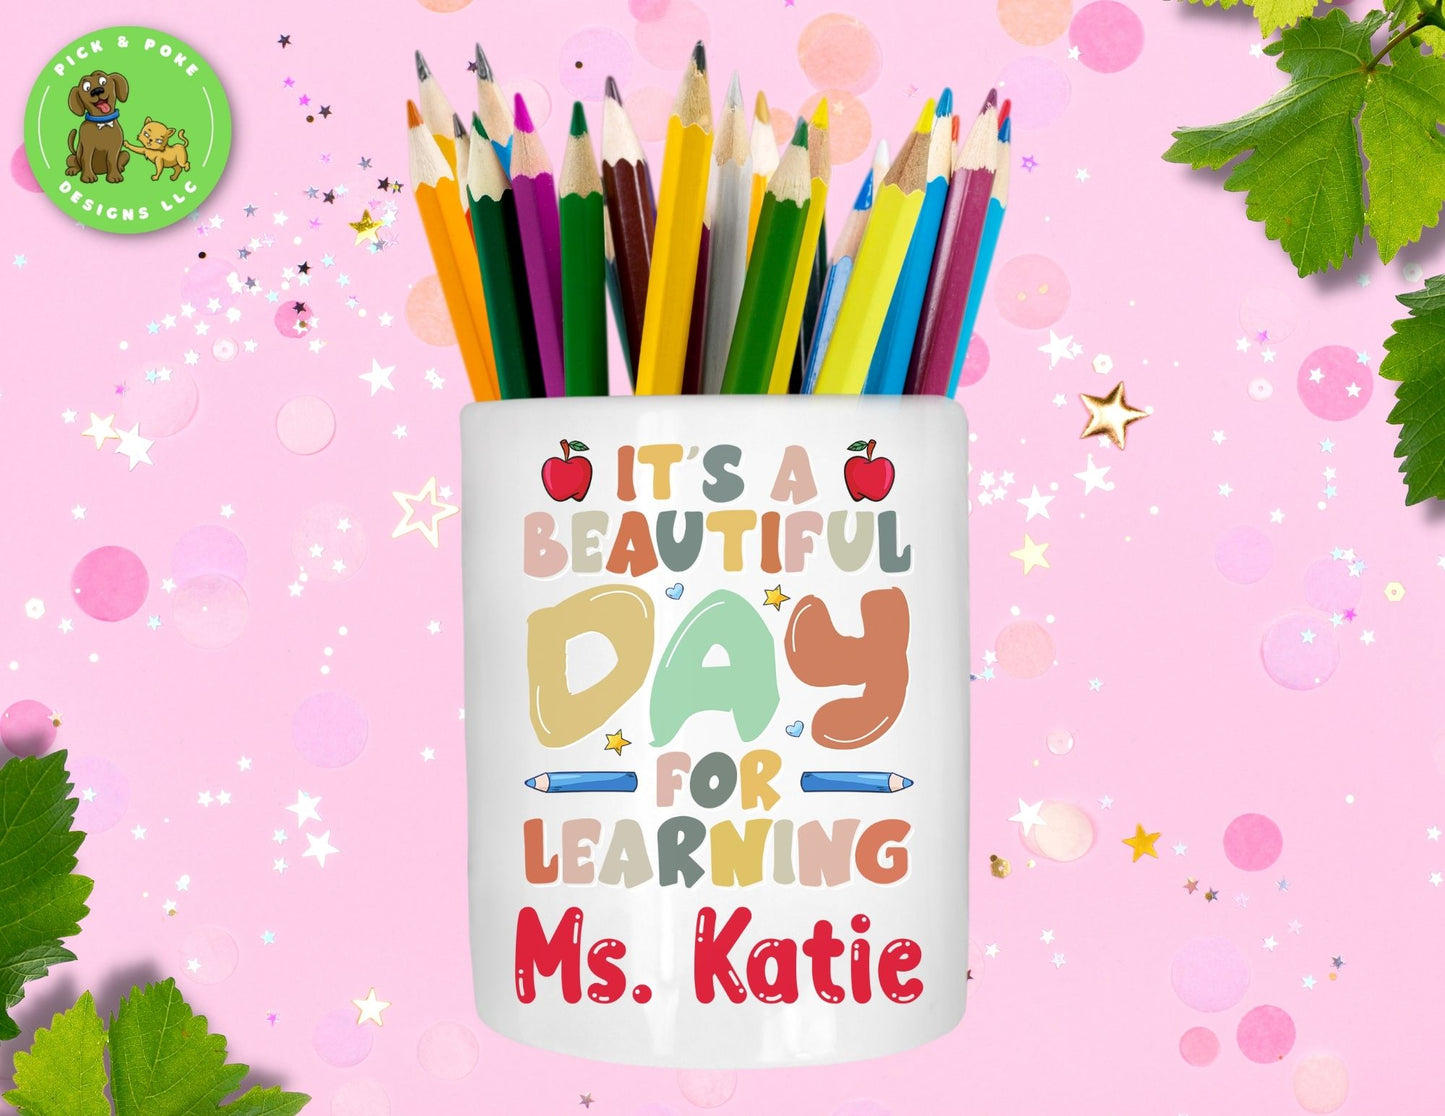 Personalized teacher pen and pencil ceramic holder with the quote "It's a beautiful day for learning"